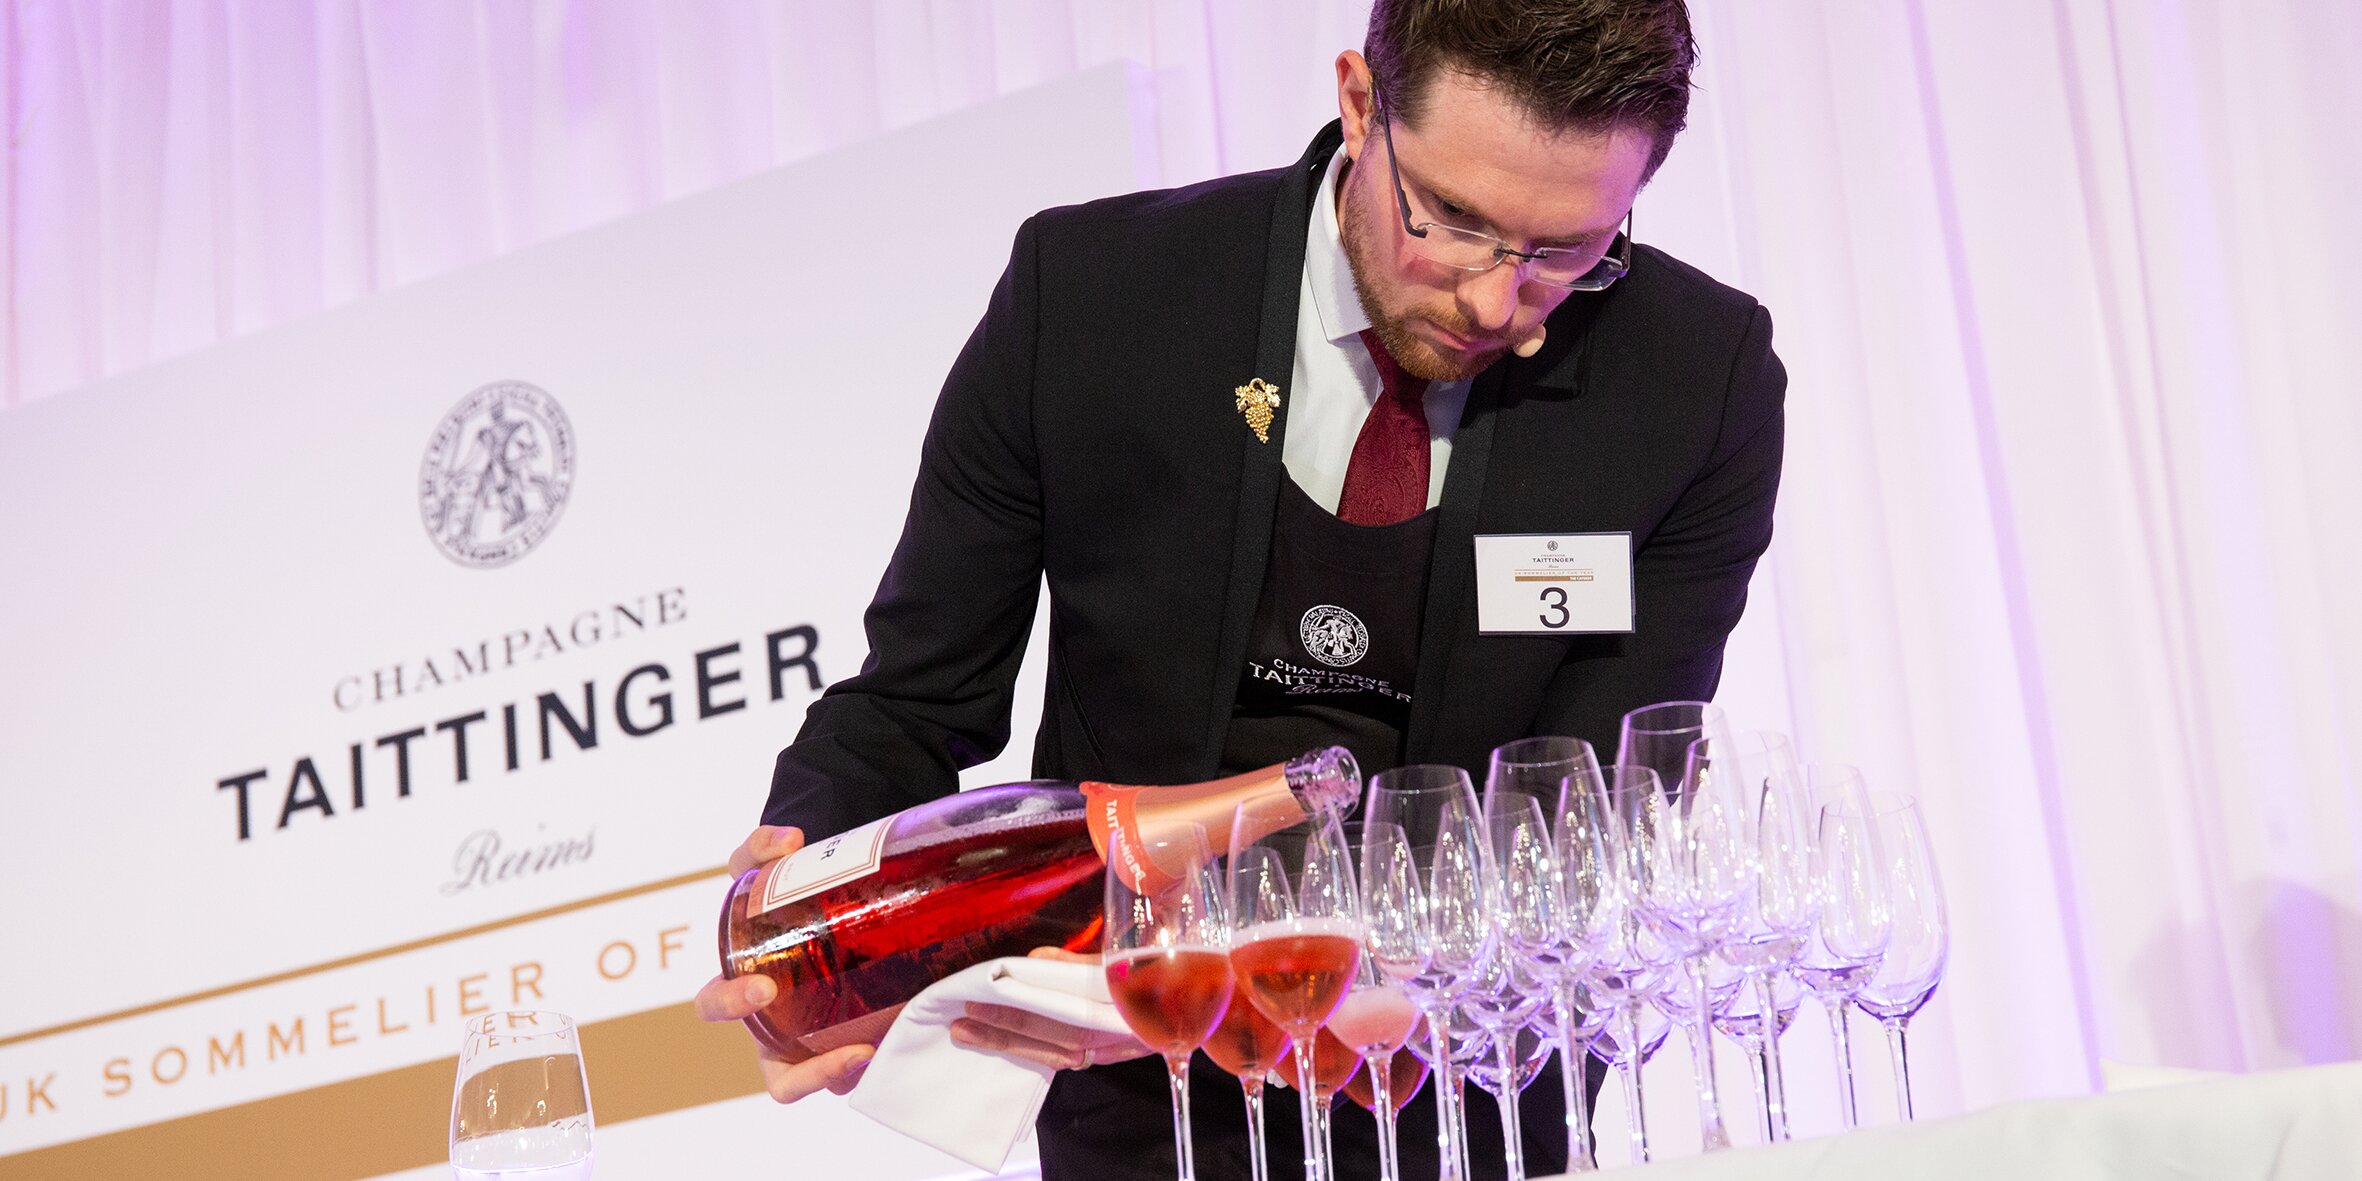 One week left to enter the Taittinger UK Sommelier of the Year 2022